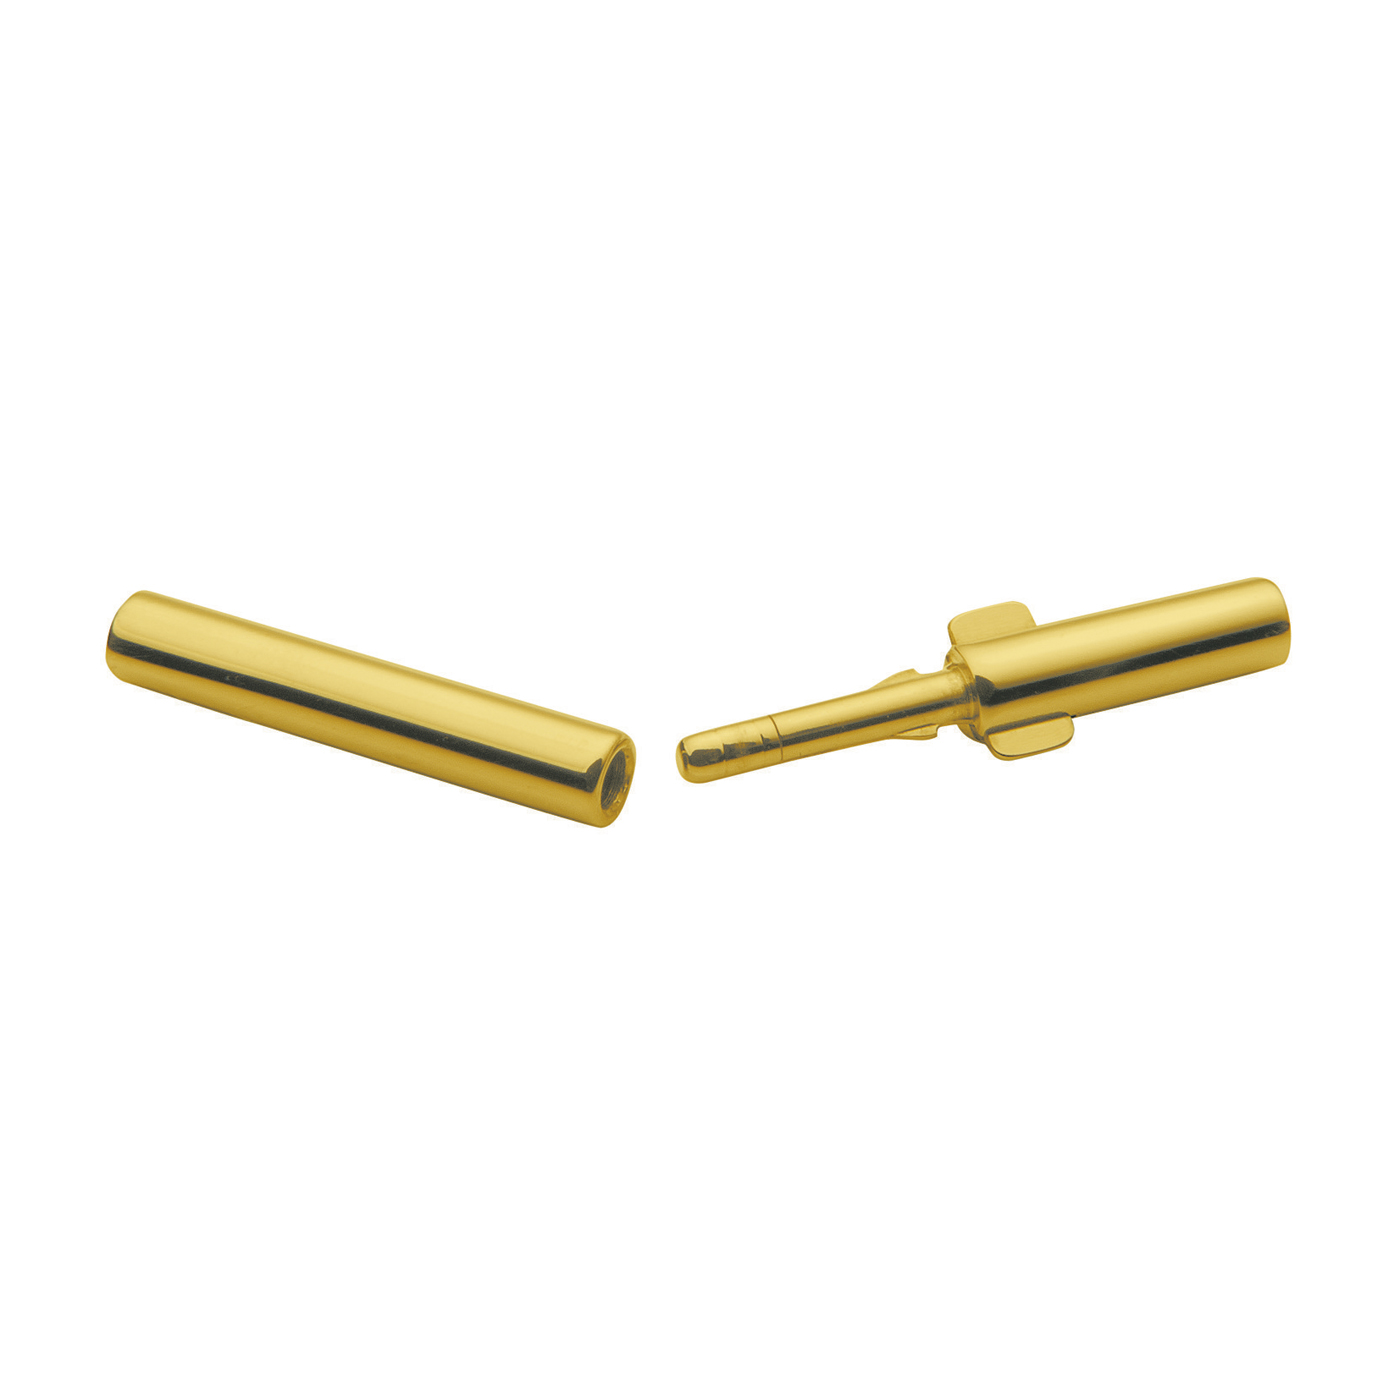 Double Clip Clasp, Stainless Steel Gold-Pl., ø 3.5 x 3.0 mm - 1 piece